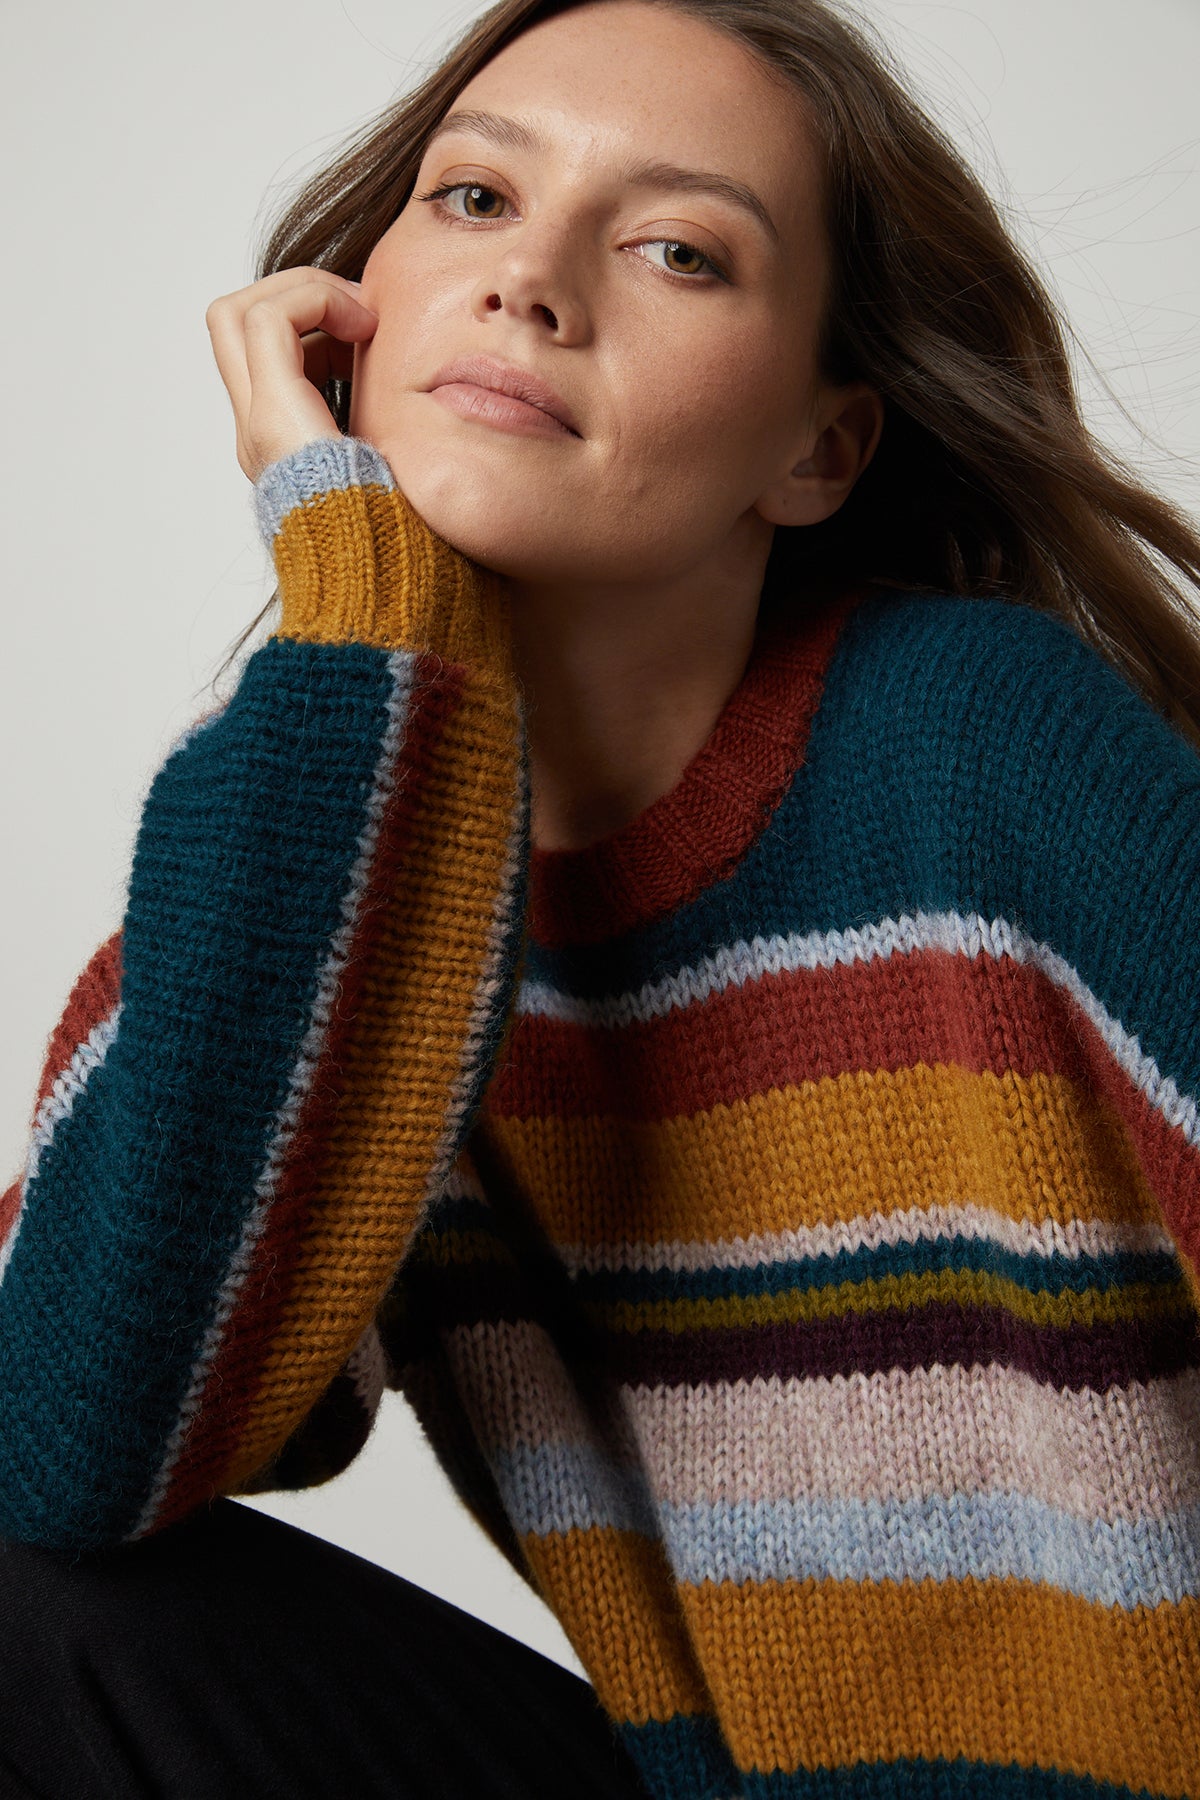 A woman is posing for a photo wearing the Velvet by Graham & Spencer SAMARA STRIPED CREW NECK SWEATER, showcasing the cozy elegance of her outfit.-35650106654913